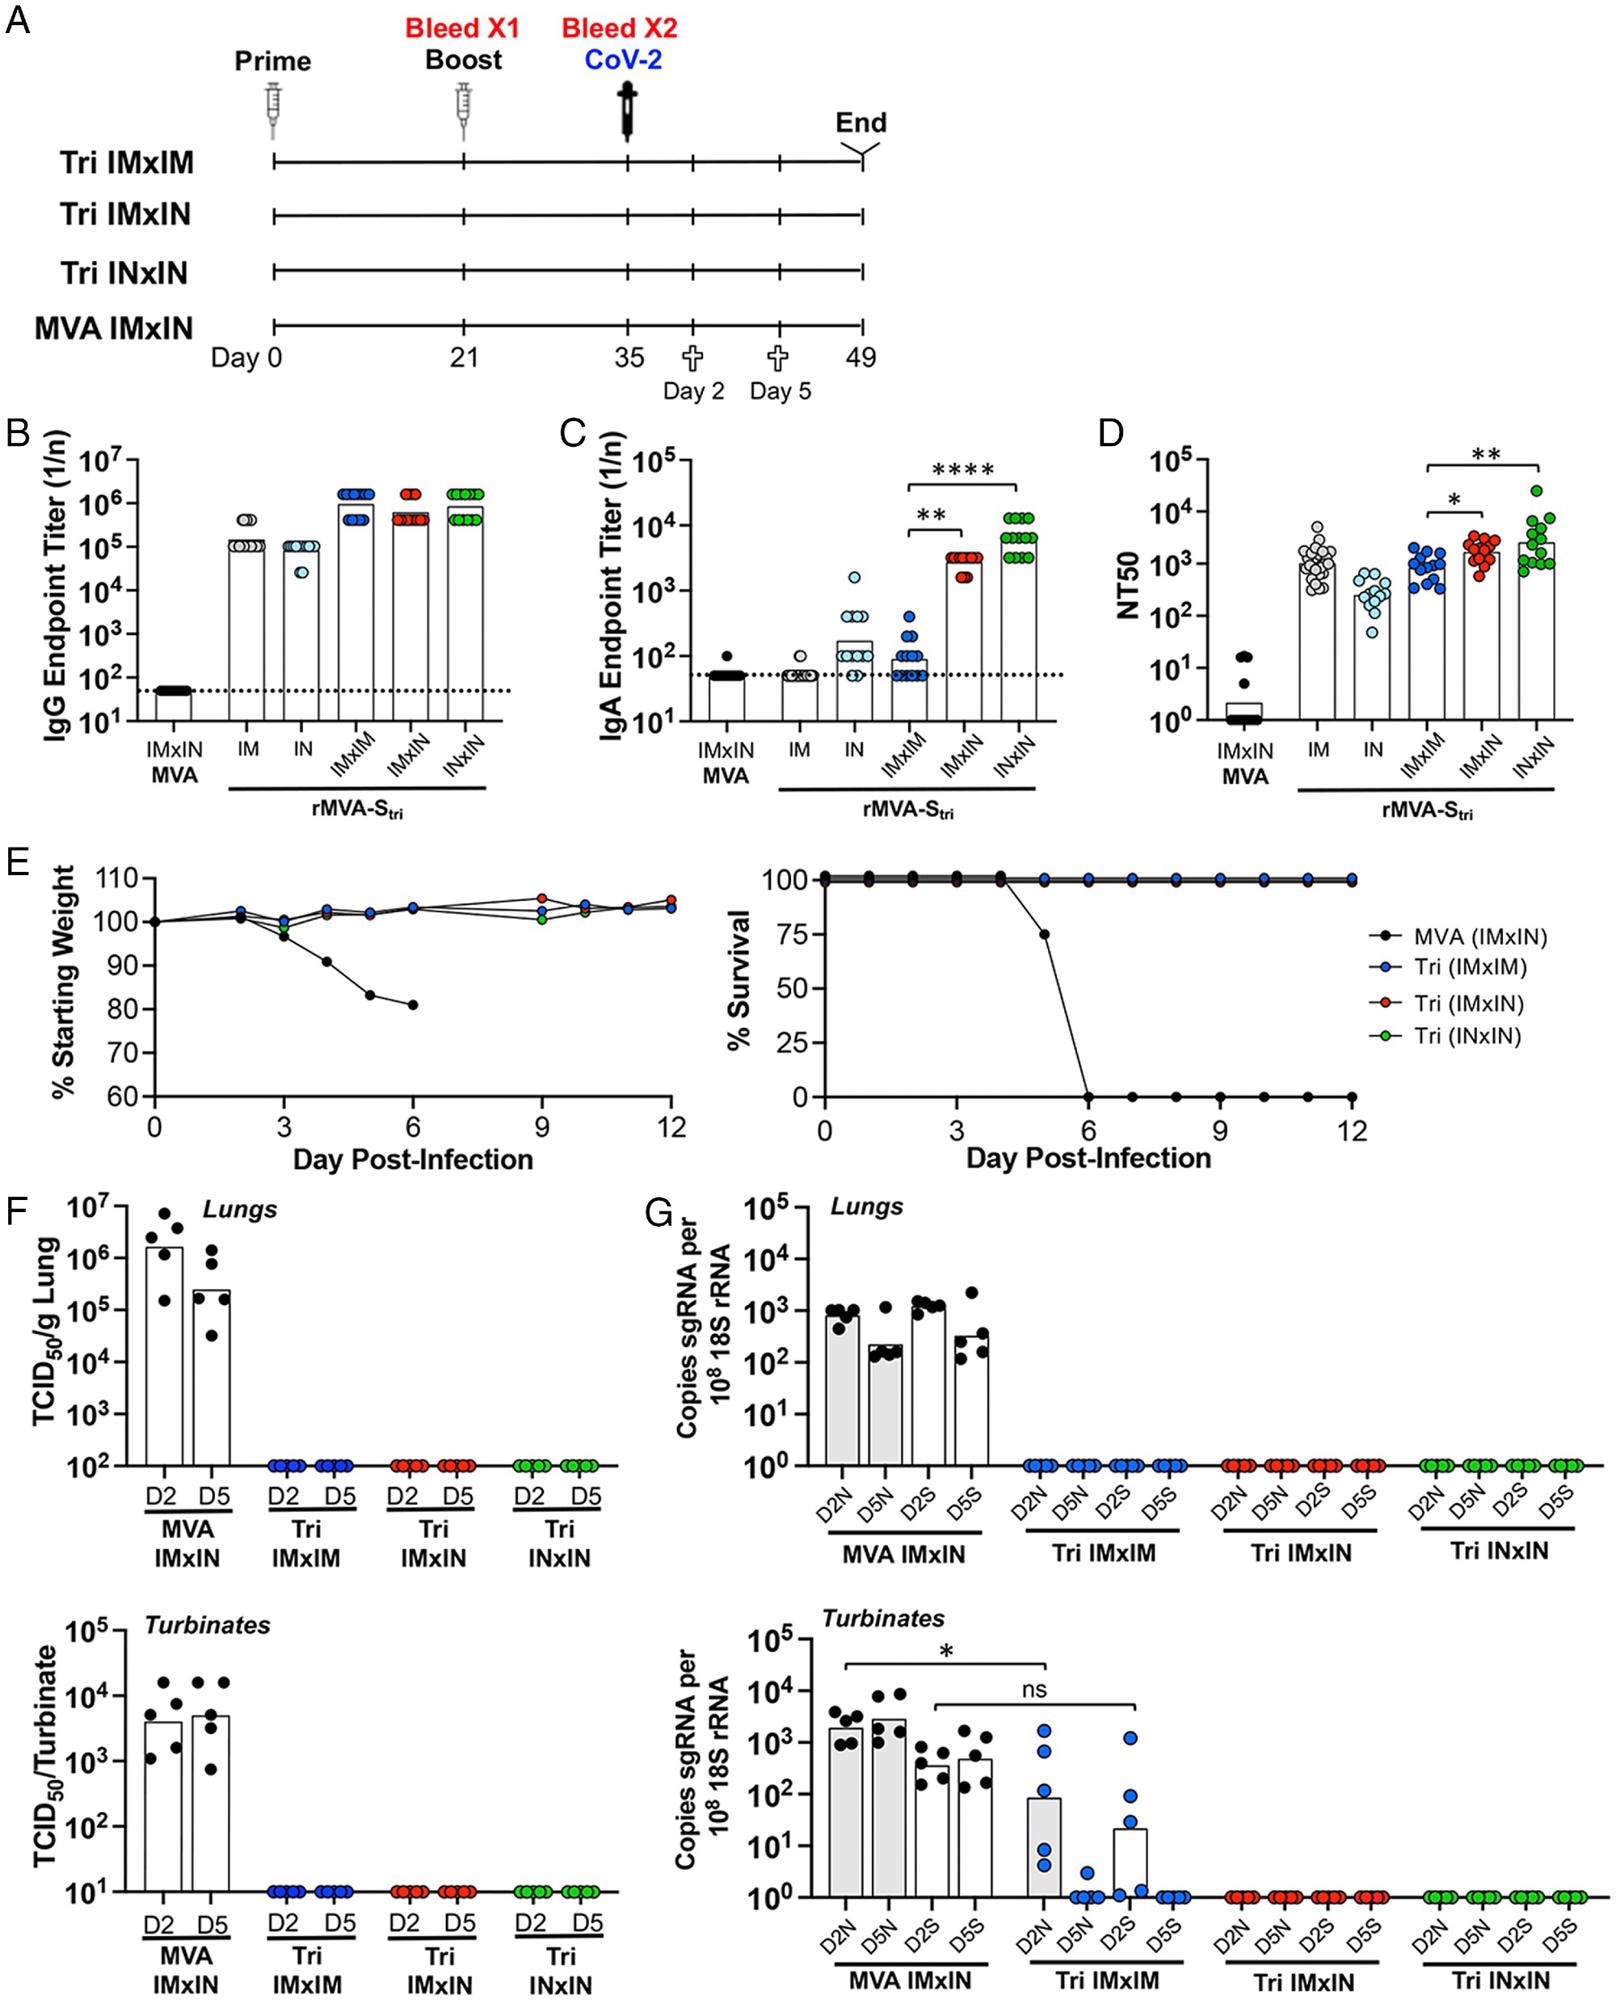 Comparison of immune responses and protection following IN and IM vaccinations.  (A) K18-hACE2 mice were primed and boosted with rMVA-Stri by IN or IM route to form three groups of 13 mice: IMxIM, IMxIN, and INxIN.  In addition, a control group received MVA IM followed by MVA IN.  Mice from each group were bled at 3 wk after the prime and 2 wk after the boost.  At the latter time, mice were challenged by IN inoculation of 105 TCID50 of SARS-CoV-2.  On days 2 and 5 after challenge, five mice each group were killed and three remained to follow weight and morbidity.  (B and C) Serum IgG and IgA endpoint ELISA titers are shown for individual mice and the geometric mean.  The dashed line represents the limit of detection.  (D) Individual and geometric mean pseudovirus neutralizing titers are shown.  (E) Three mice of each group were monitored for weight loss and survival.  (F) At days 2 and 5 after challenge with SARS-CoV-2, homogenates were prepared from the lungs and nasal turbinates of five mice from each group and the TCID50 of SARS-CoV-2 determined.  (G) RNA was extracted from the homogenates and copies of sgN (shaded) and sgS (unshaded) RNA were determined by ddPCR and normalized to 18S rRNA in the same sample.  Significance: *P = 0.04, **P < 007, ****P < 0.0001;  ns, not significant.